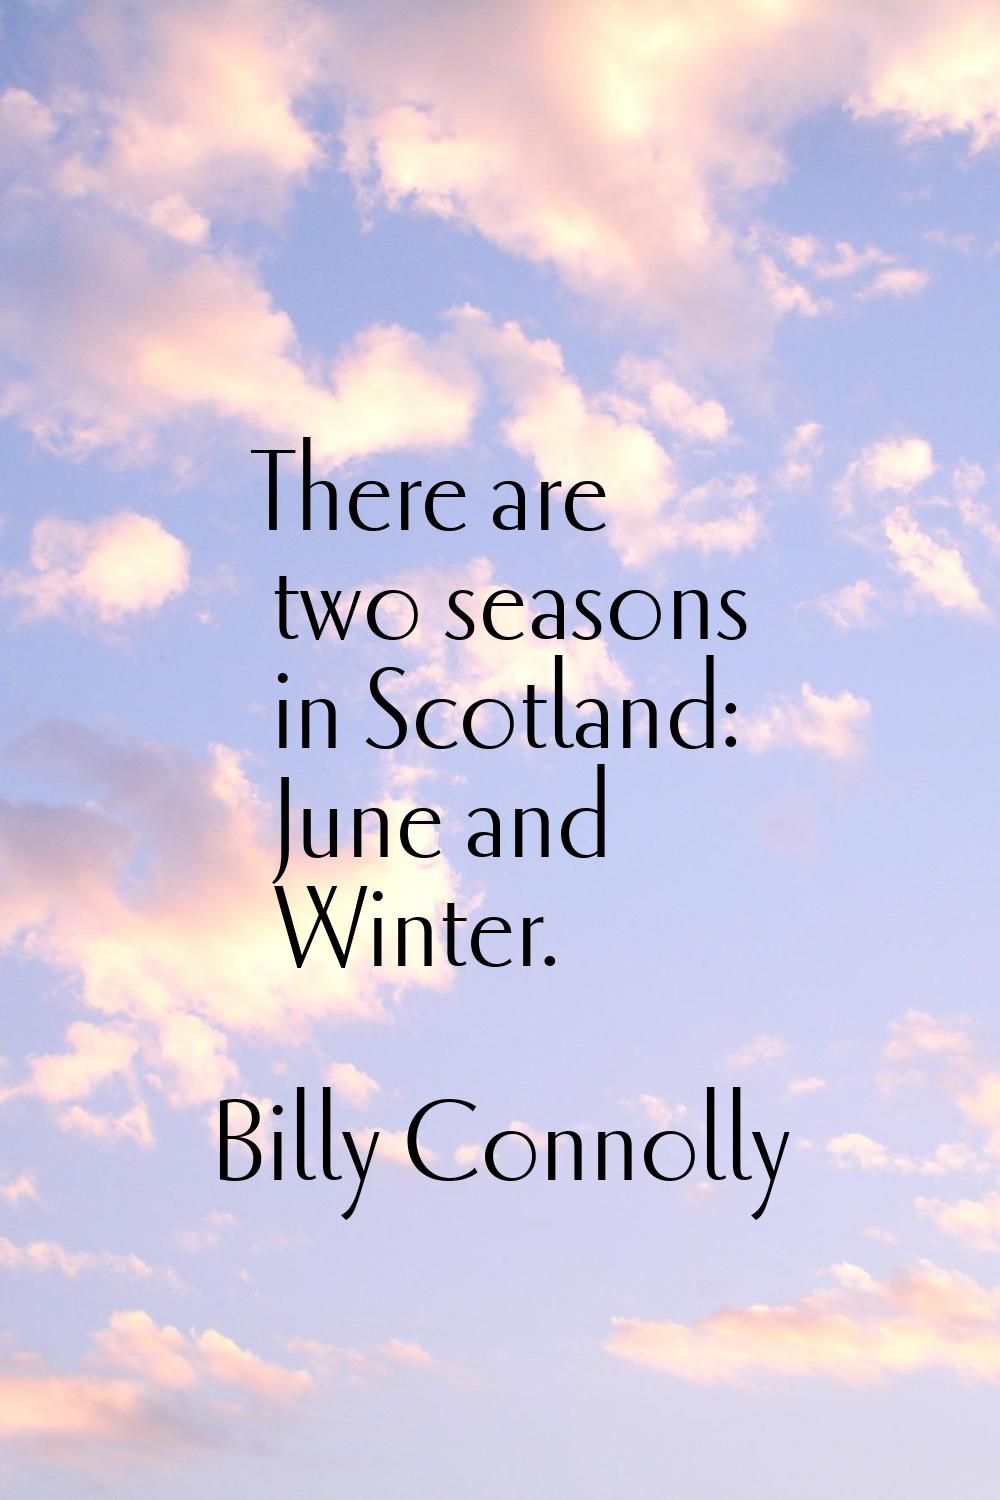 There are two seasons in Scotland: June and Winter.